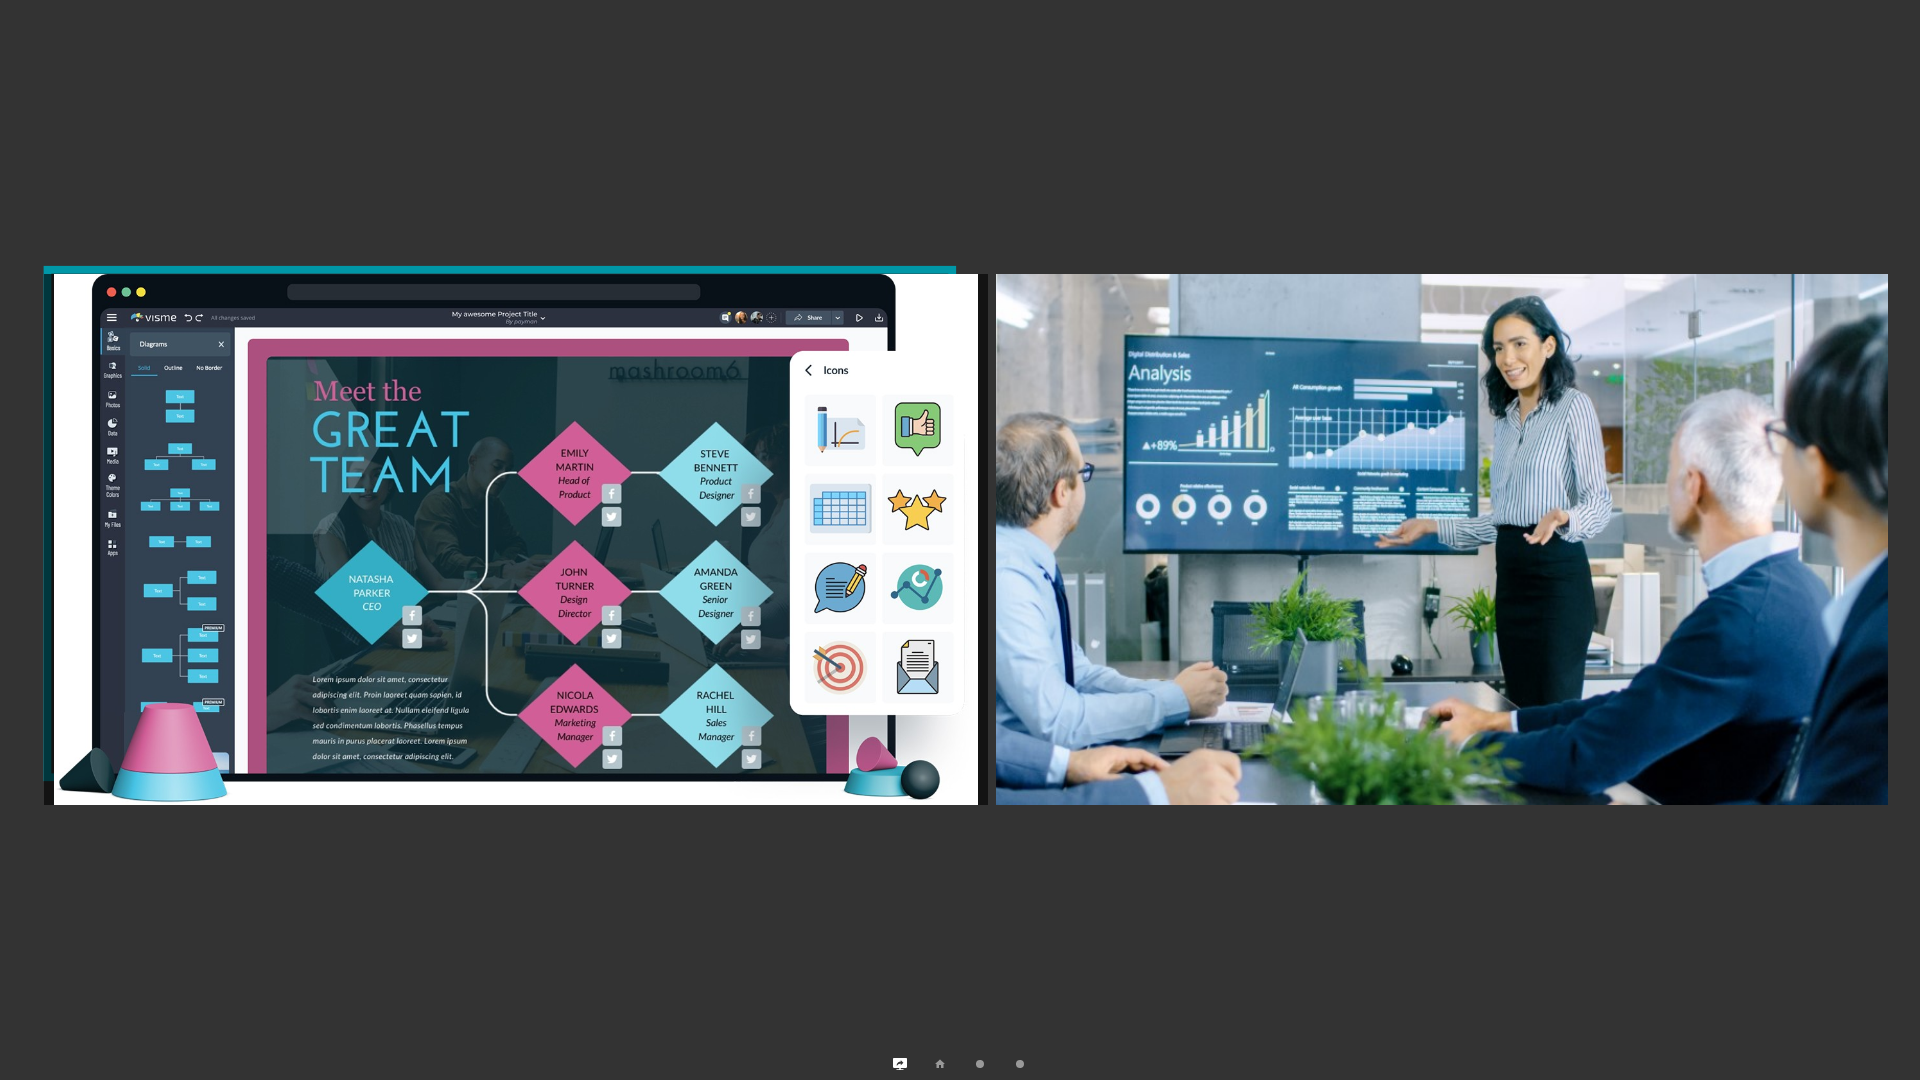 /client-android-tv/media/about_layouts_two_presentations/en.png